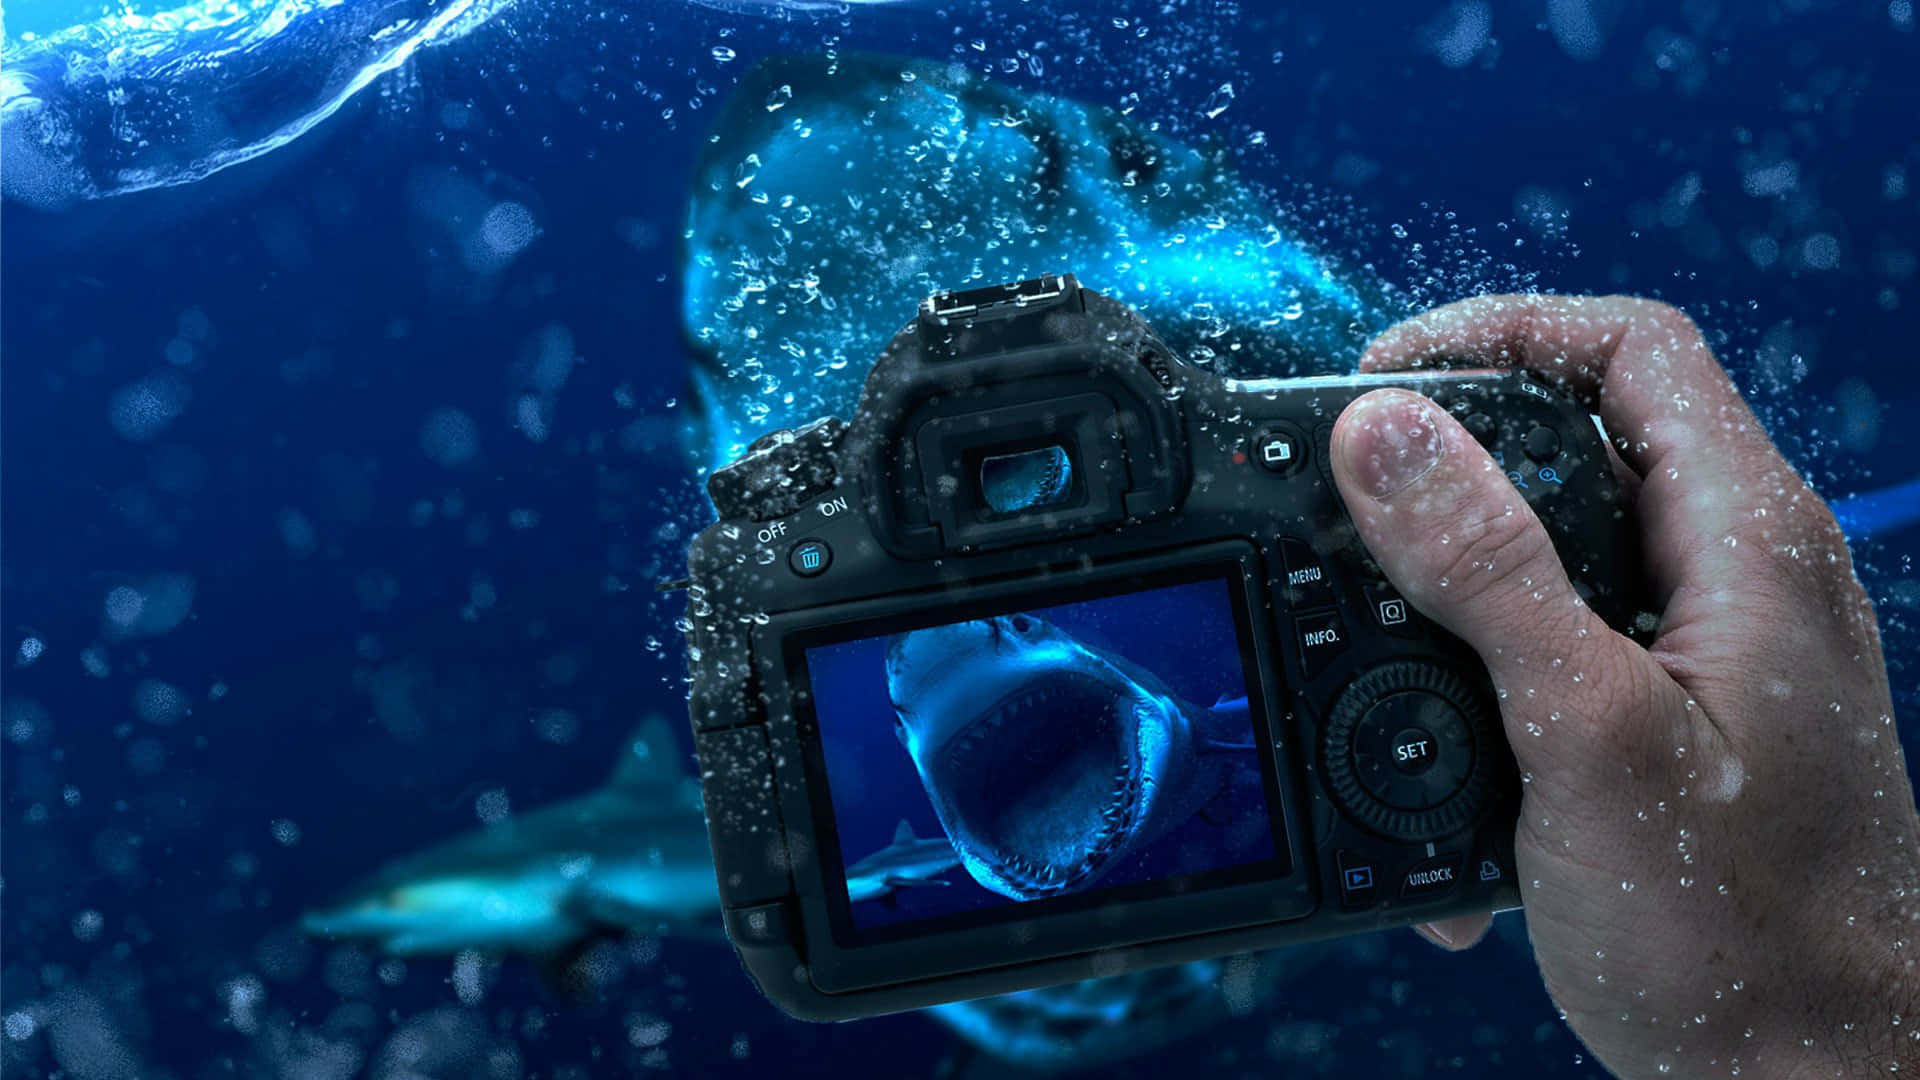 Capture the moments that matter with a high-quality camera.